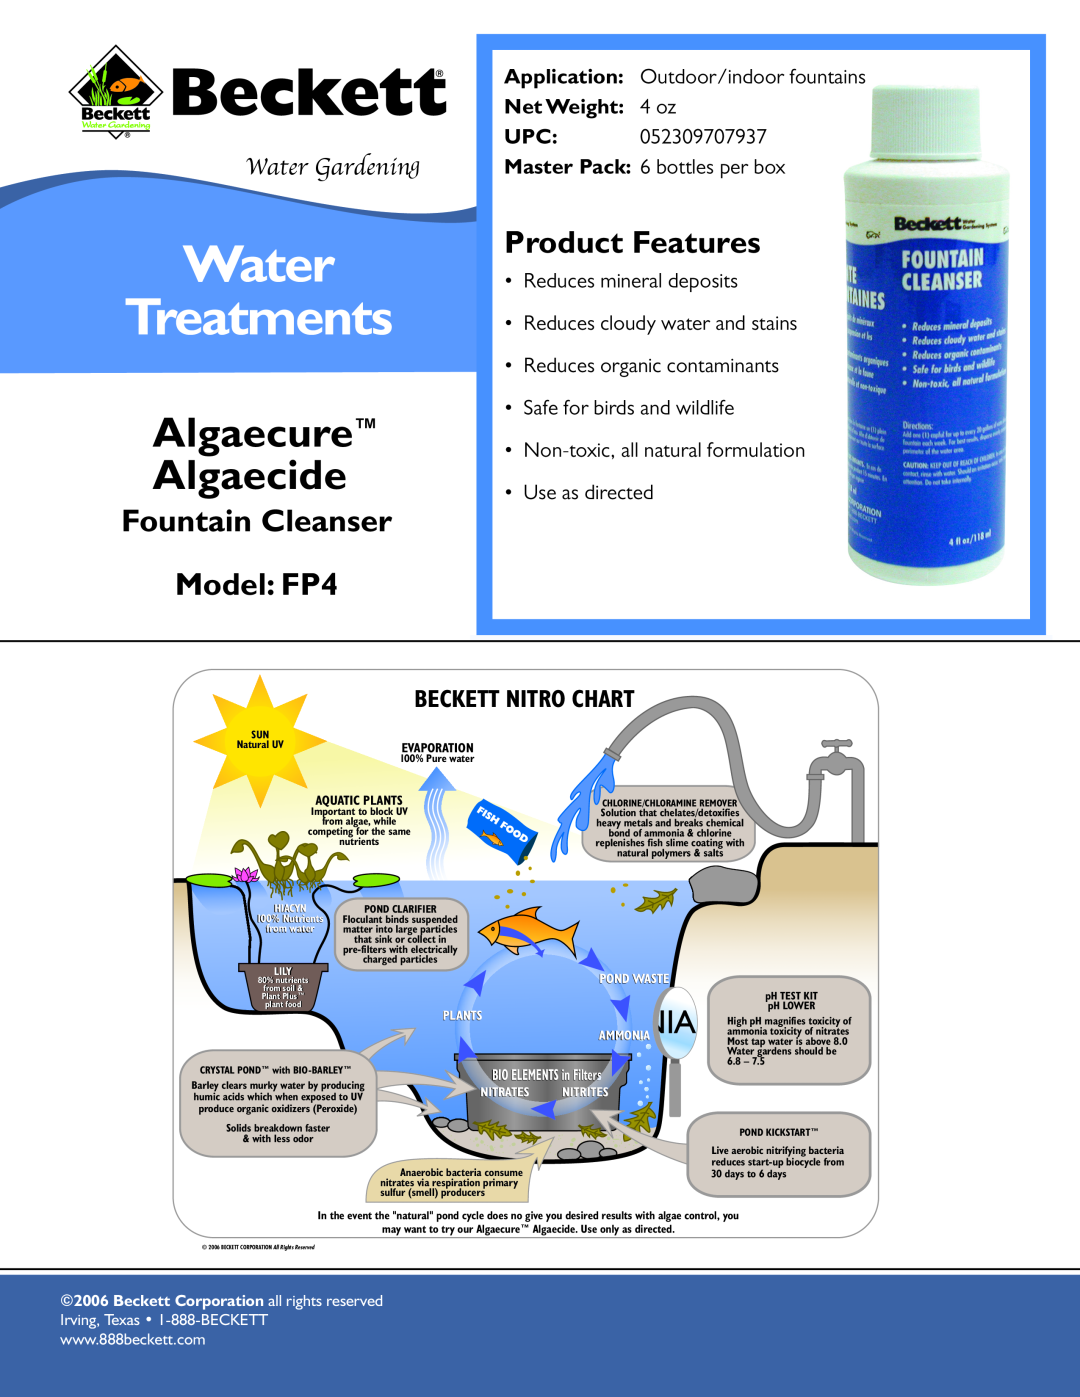 Beckett Water Gardening specifications Water Treatments, Algaecure Algaecide, Fountain Cleanser Model FP4, Application 